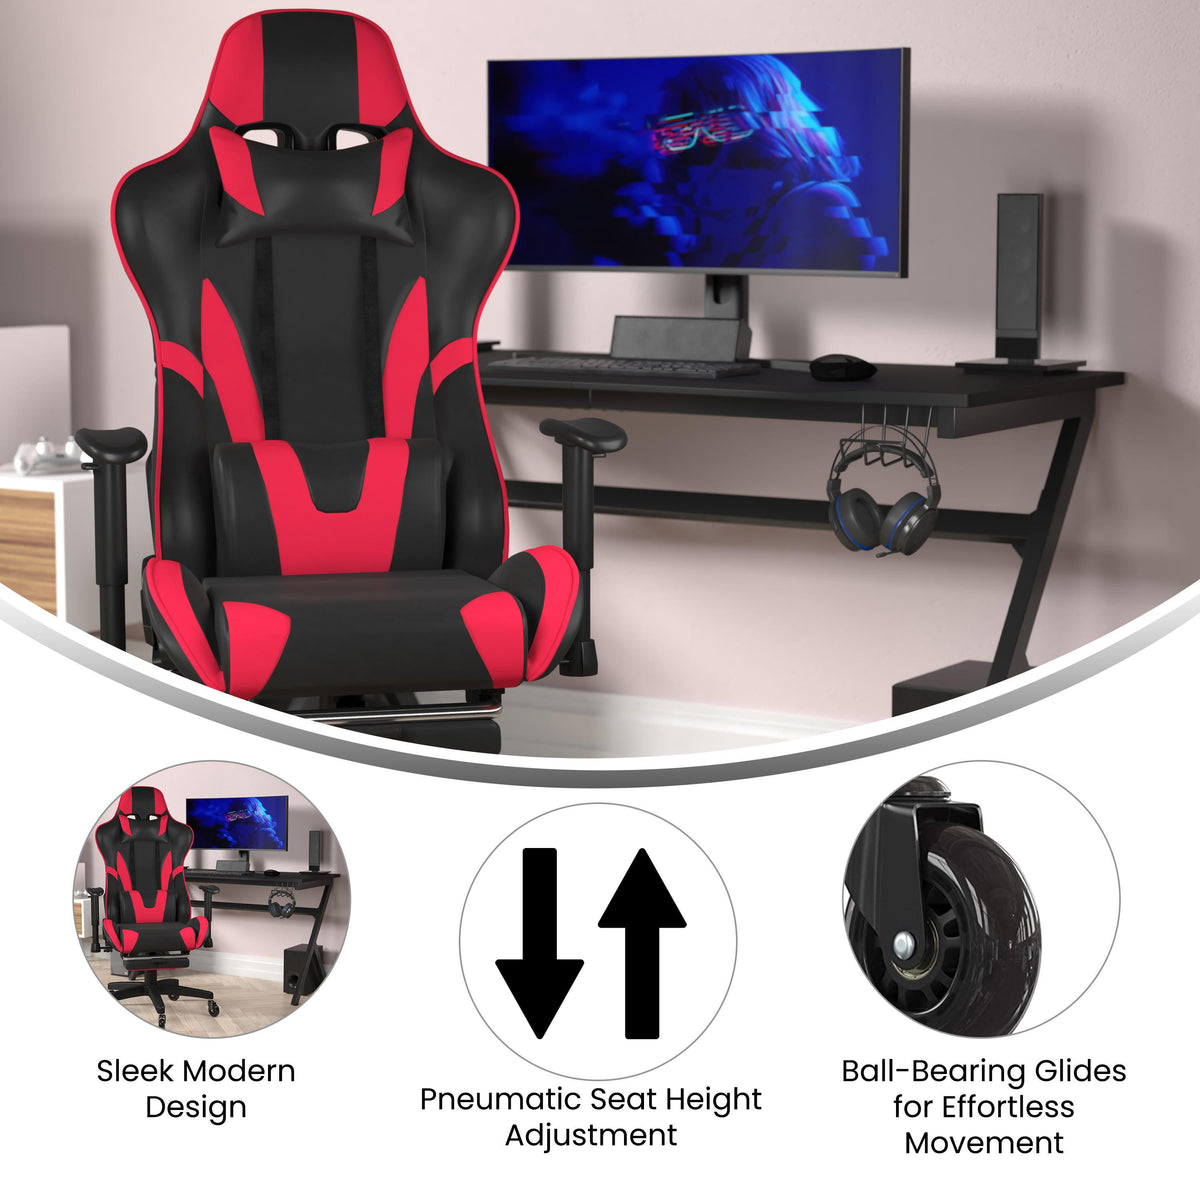 Red |#| Gaming Chair with Roller Wheels, Reclining Arms, Footrest-Red LeatherSoft